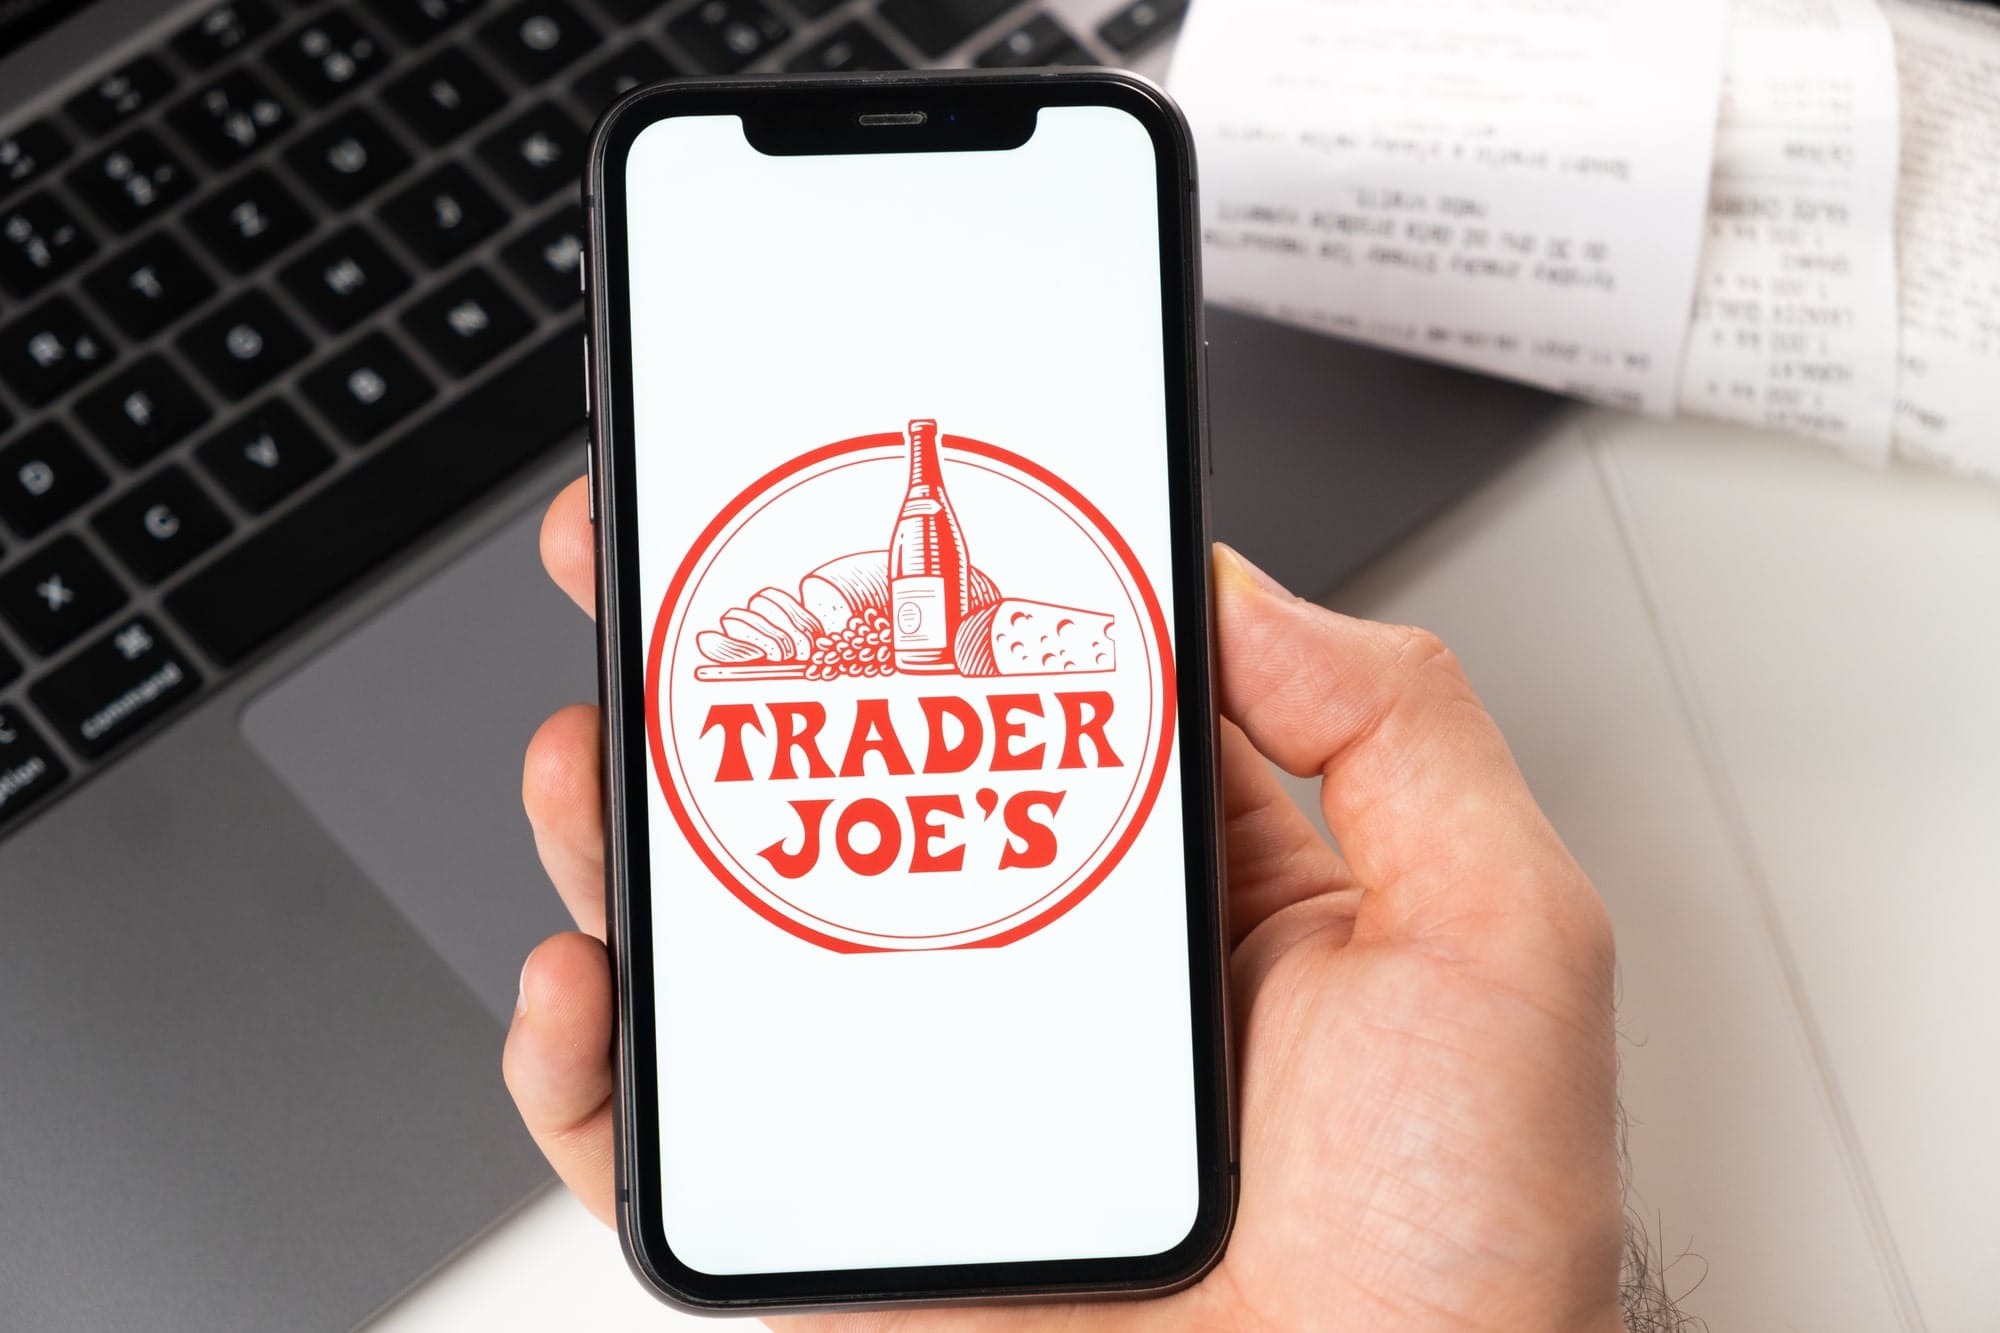 trader-joes-swot-analysis-strengths